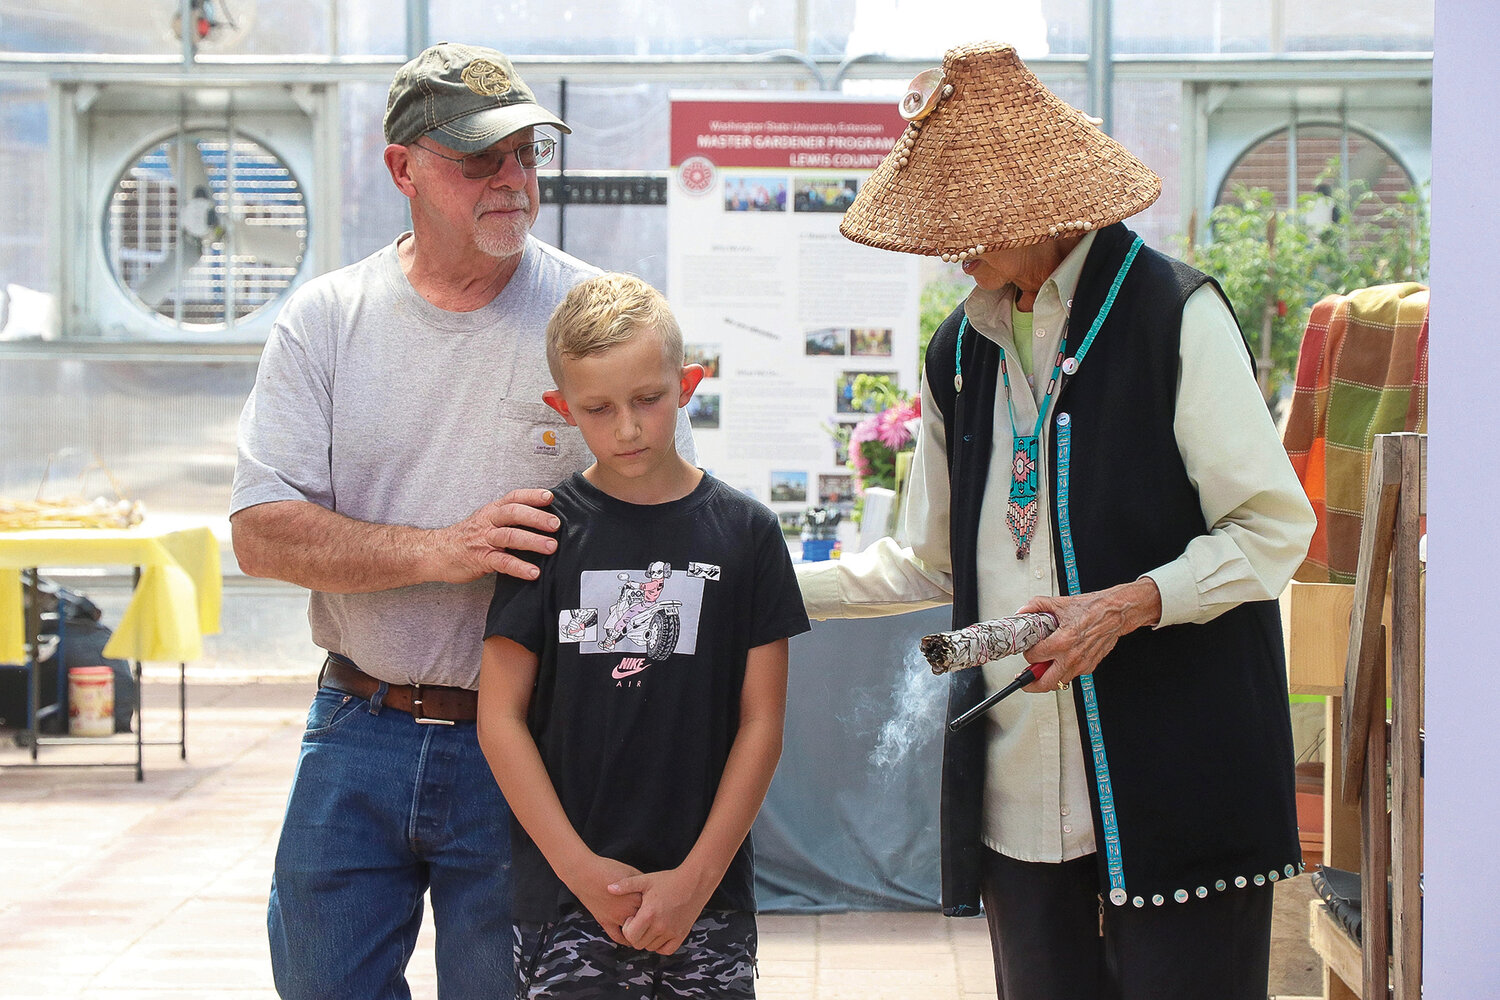 Cowlitz Indian Tribe Culture Board President John O’Brien and Cowlitz Indian Tribe Elder and Spiritual Leader Tanna Engdahl lead Owen, a Toledo Elementary School student and son of a Cowlitz Indian Tribe employee, on a spirit walk inside the new Toledo Learning Garden greenhouse on Saturday, Aug. 26.